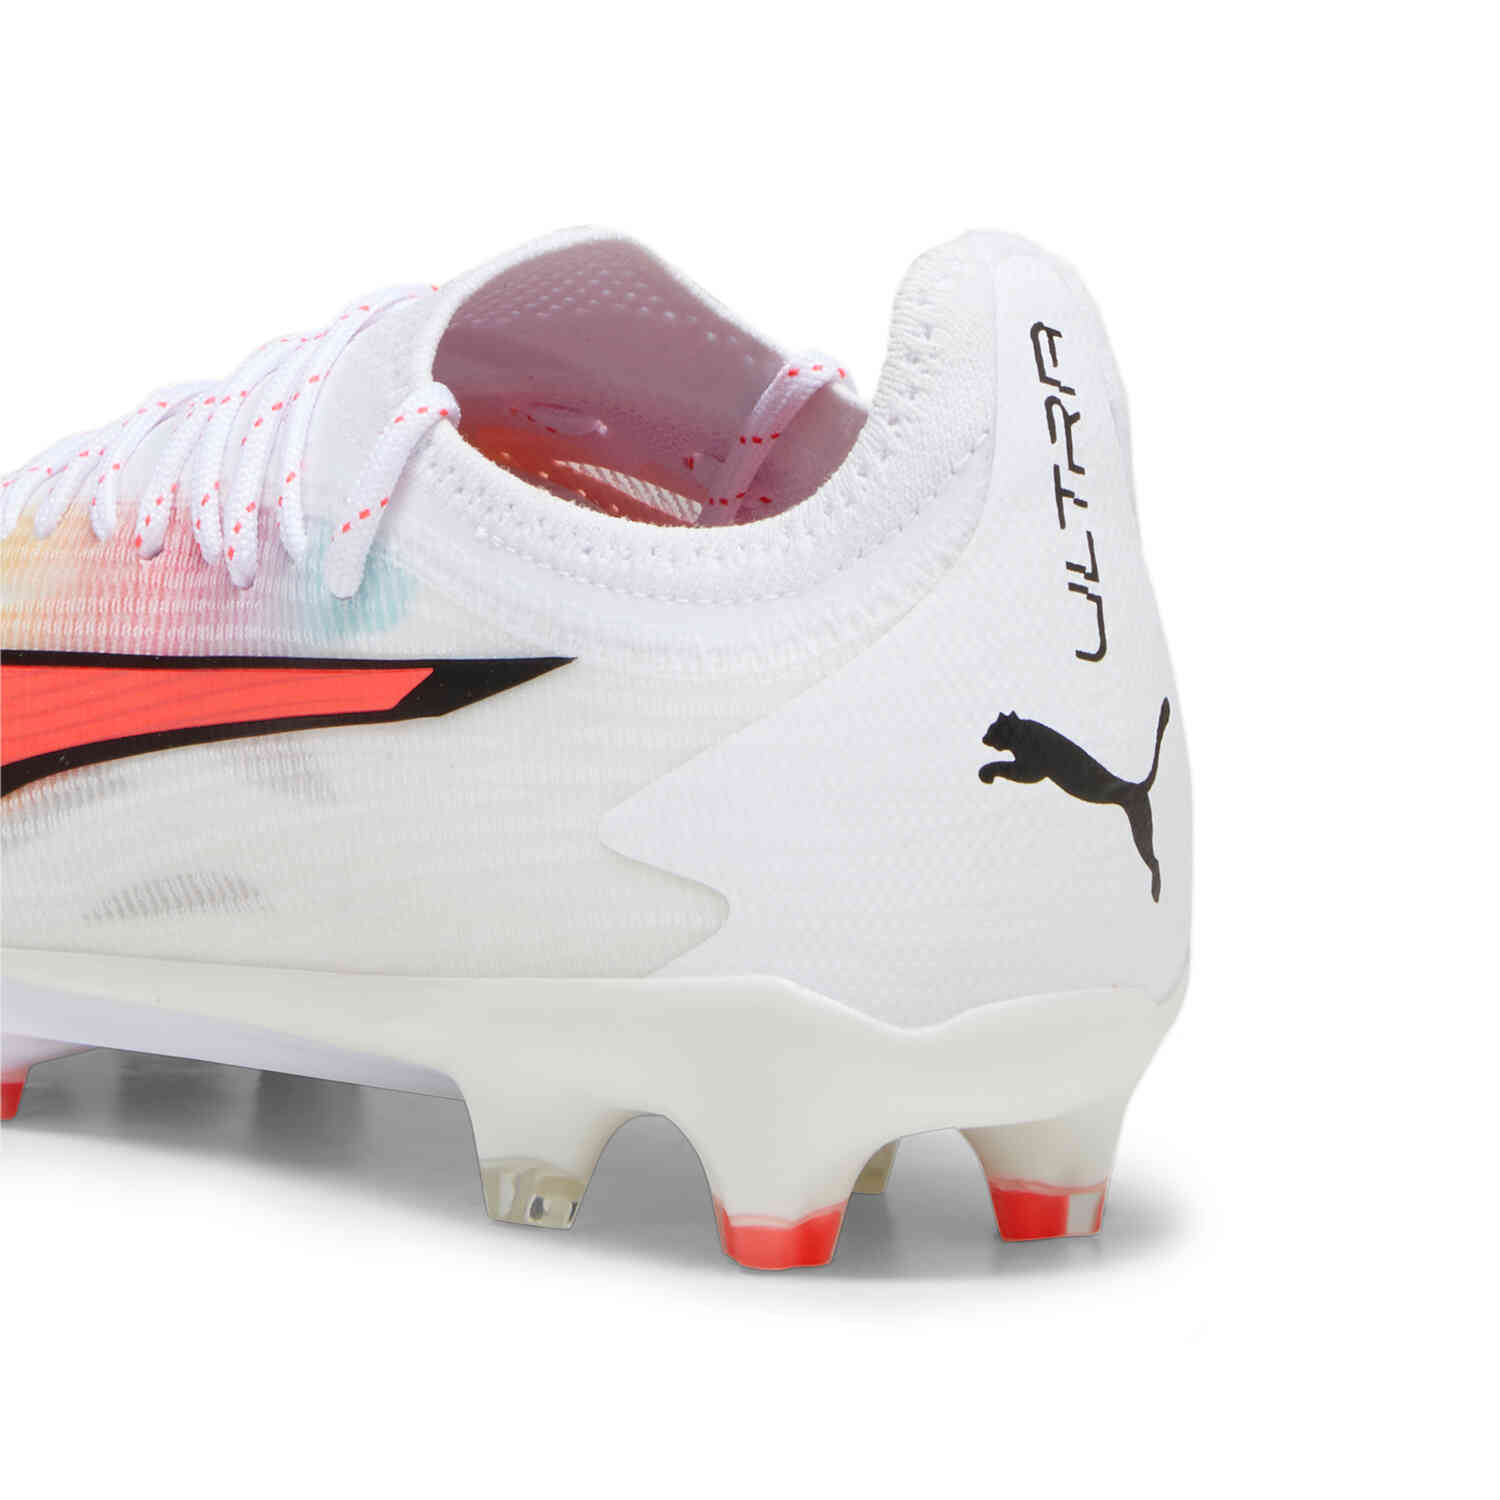 PUMA FUTURE ULTIMATE FG/AG Soccer Cleats - White, Black & Fire Orchid -  Soccer Master